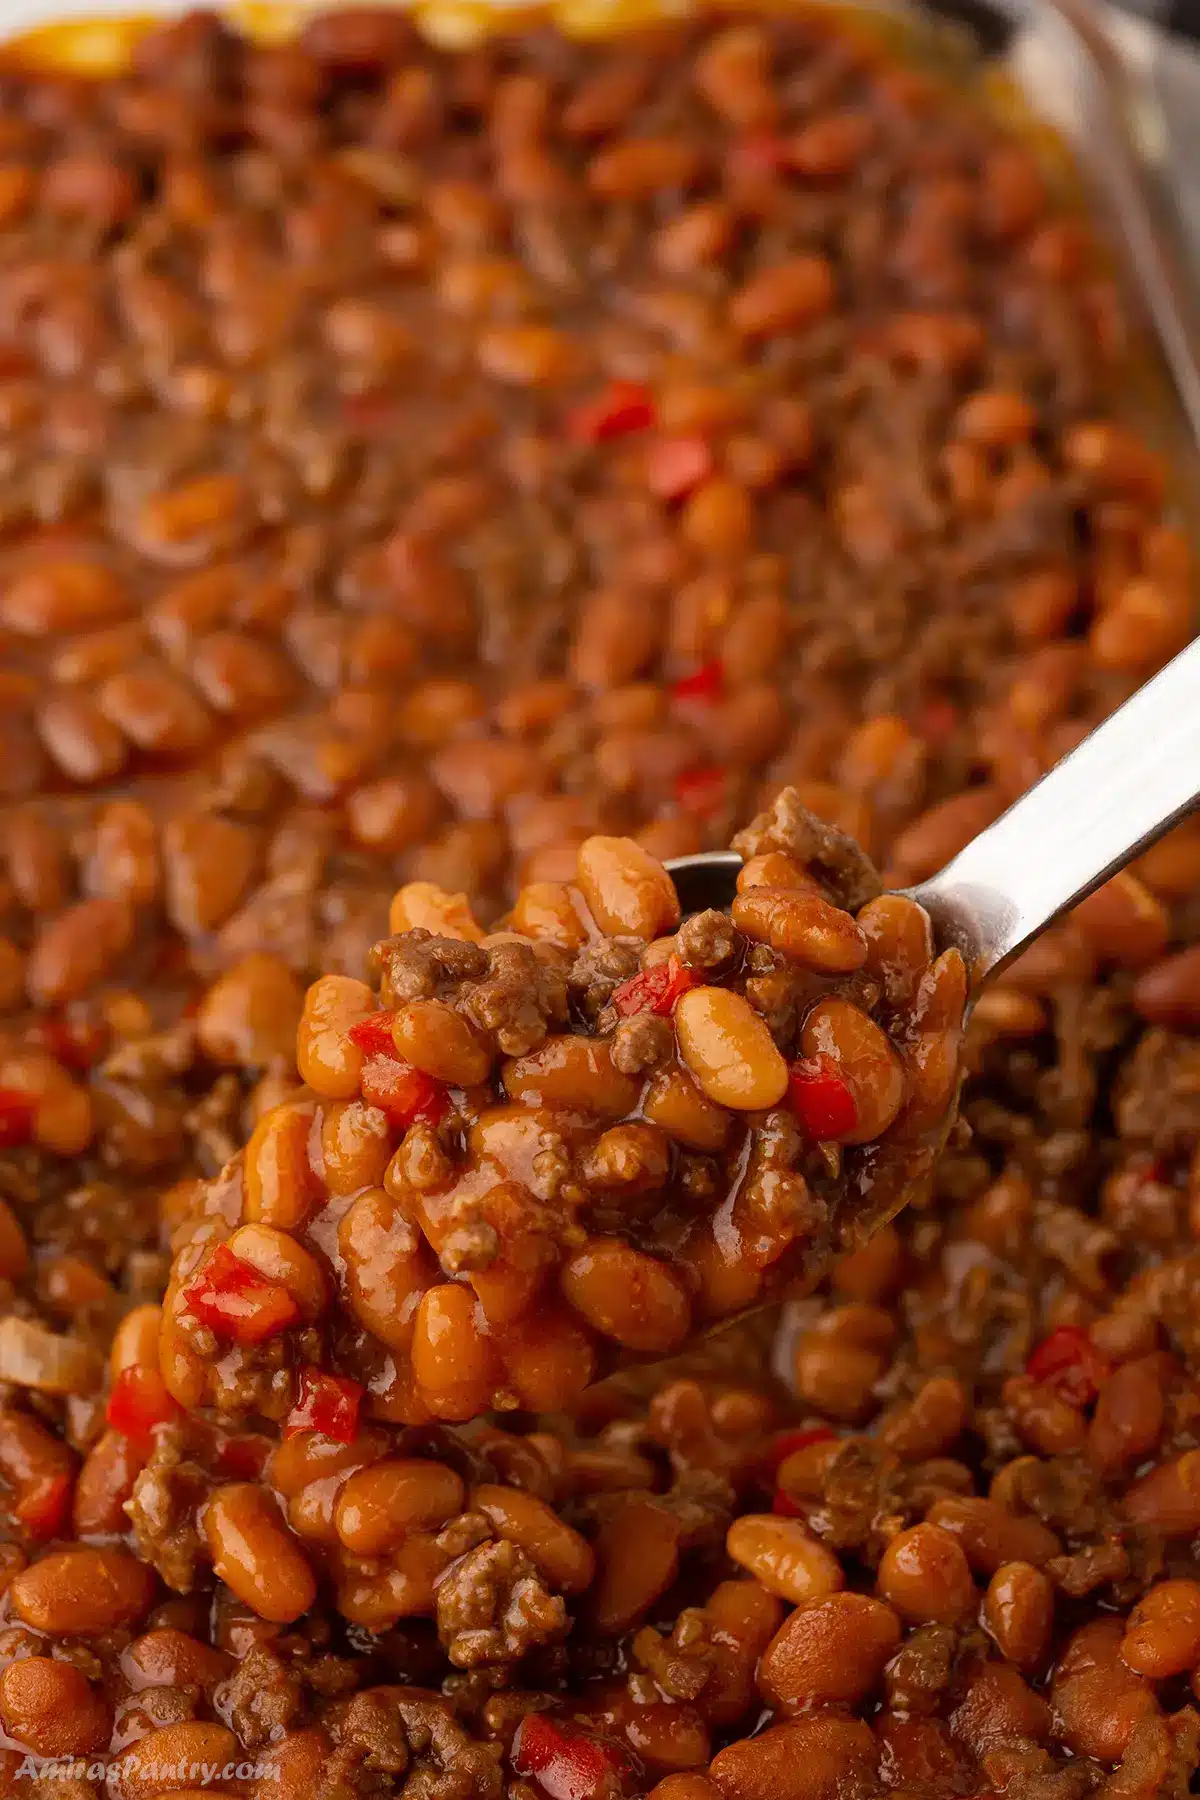 A serving spoon scooping some baked beans with ground beef.